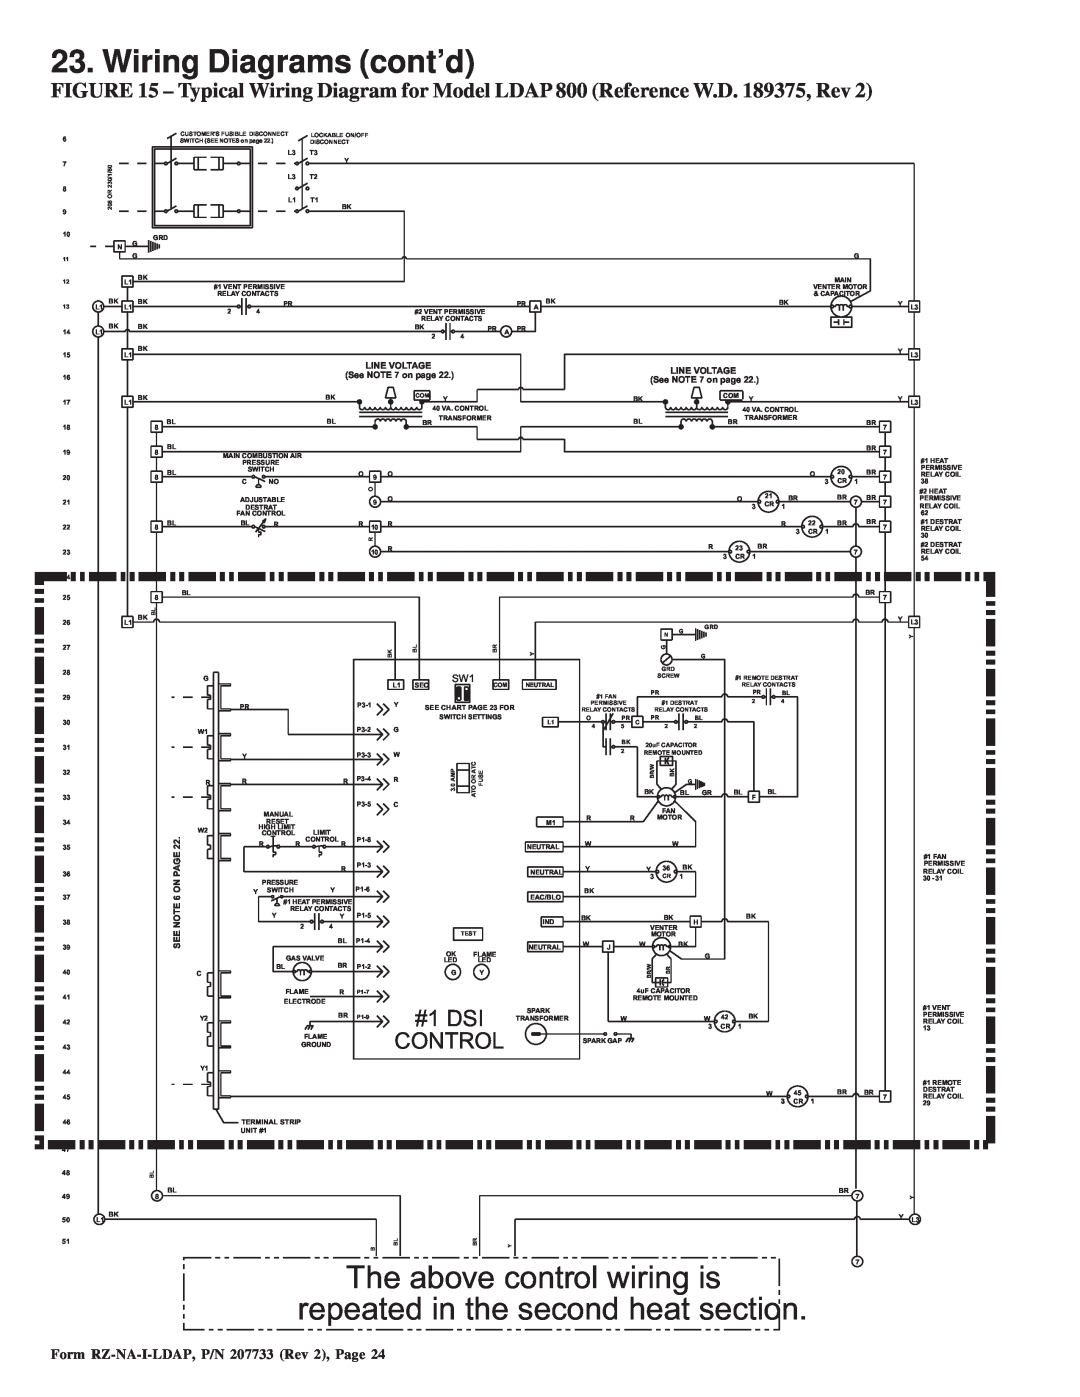 Thomas & Betts LDAP 1200 warranty Wiring Diagrams cont’d, The above control wiring is, repeated in the second heat section 